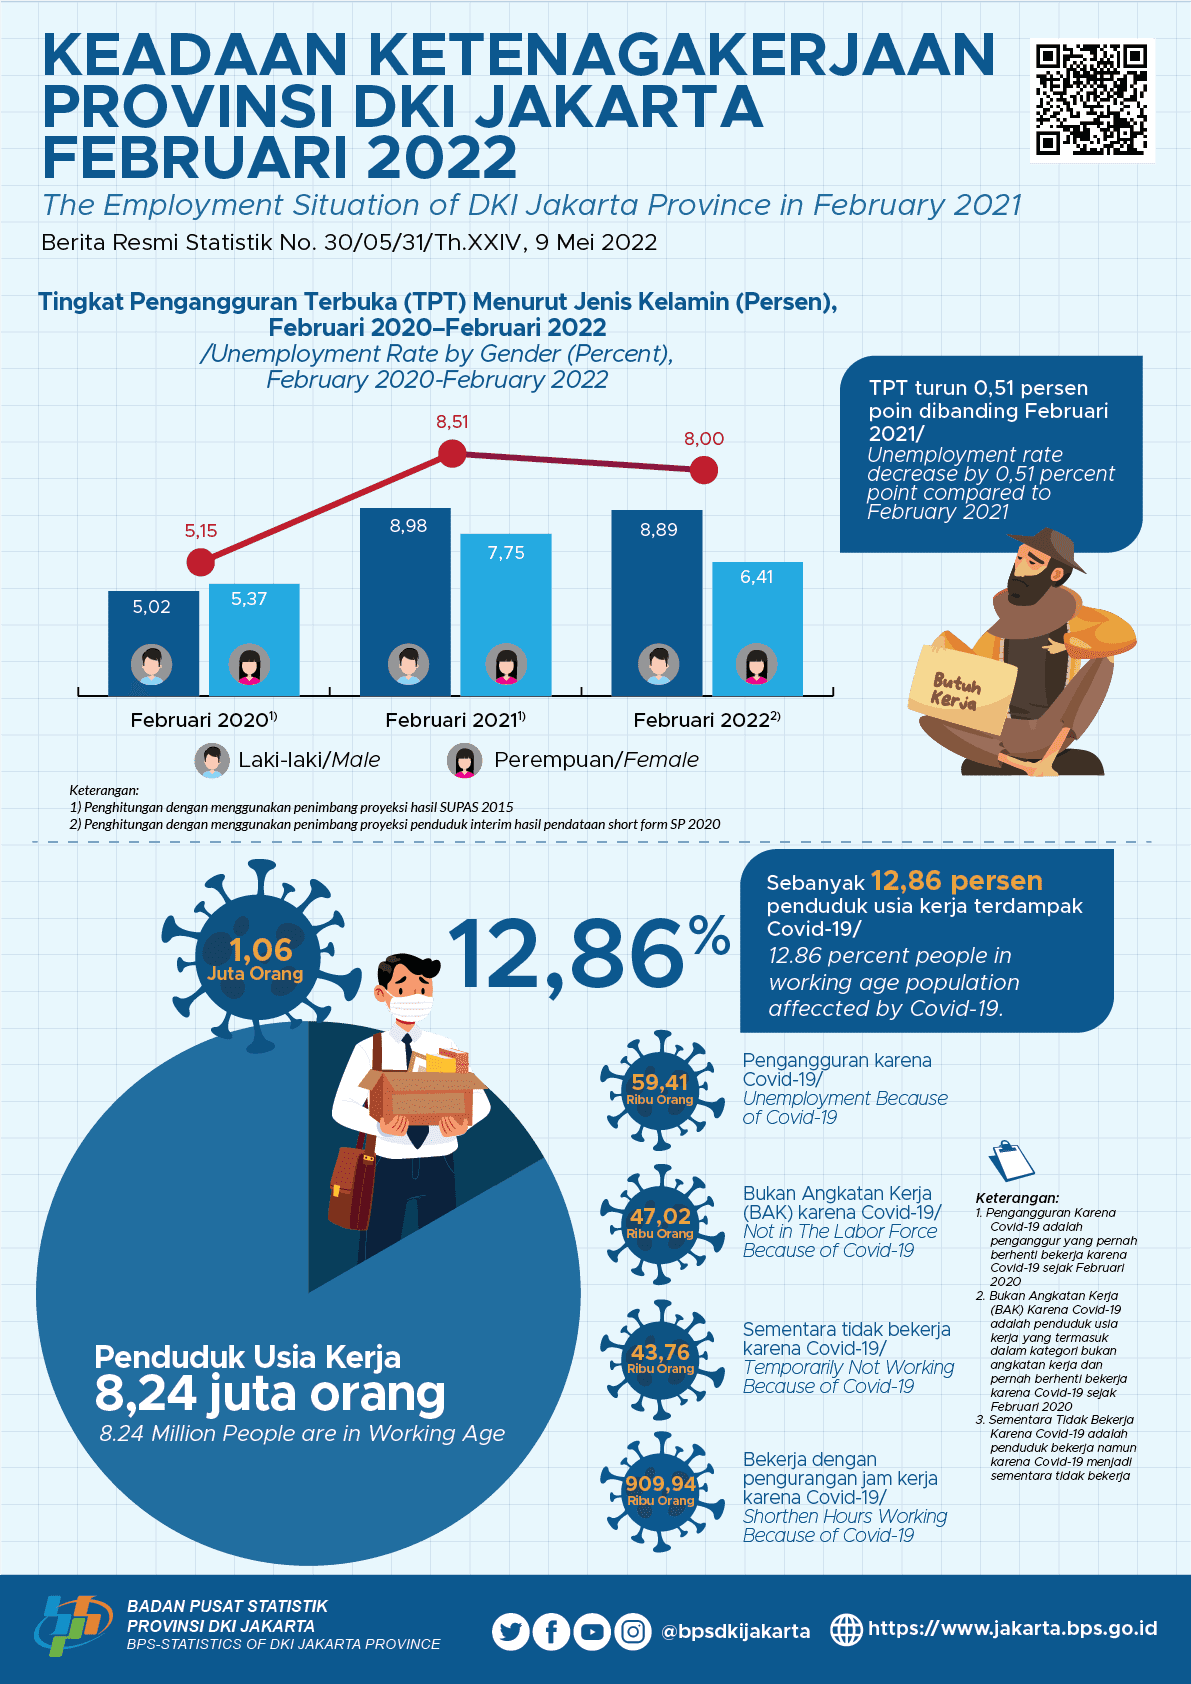 Jakarta’s Job Opportunities are Increasing  as the Economy Recovers